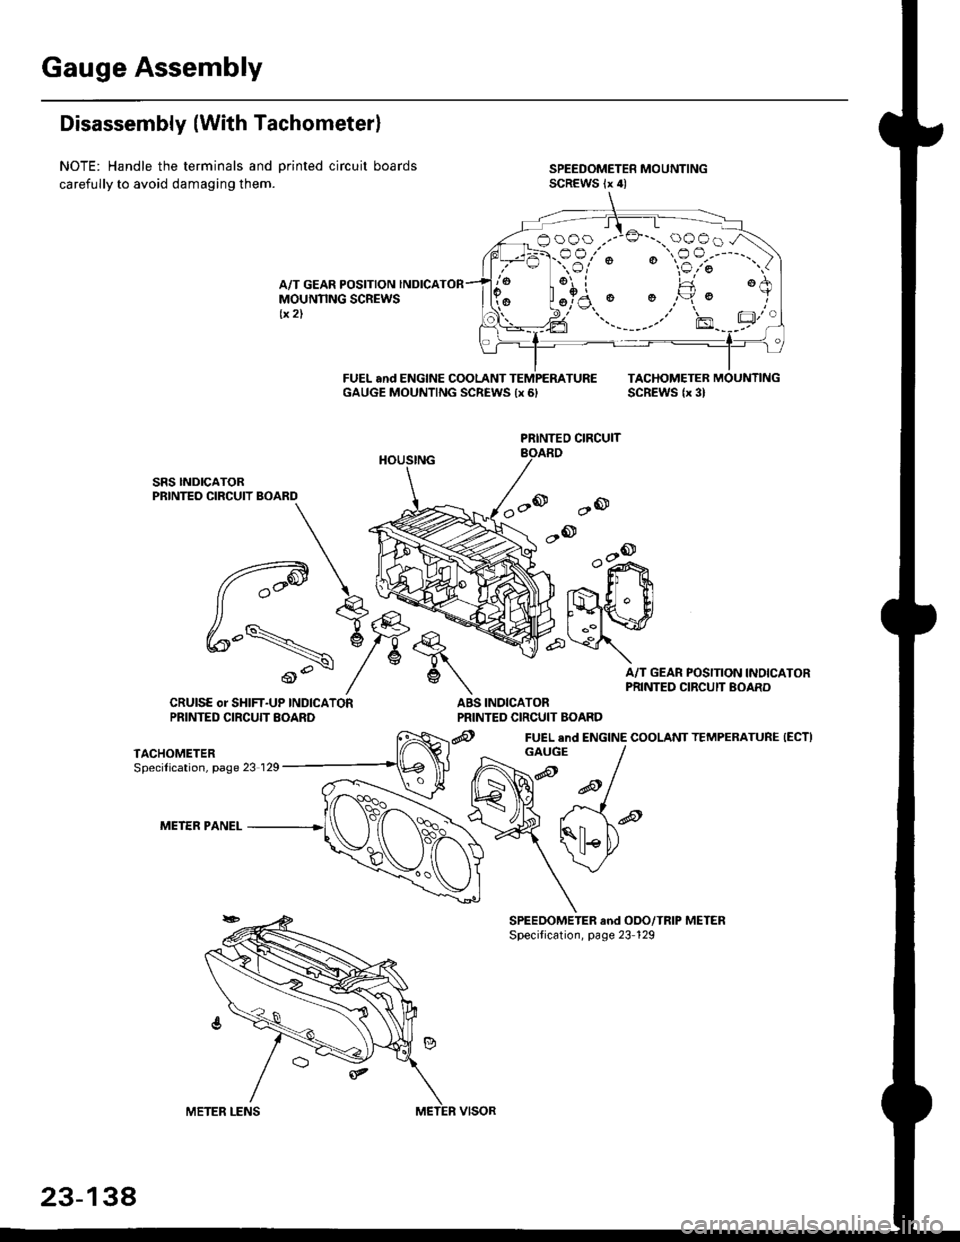 HONDA CIVIC 1997 6.G Service Manual Gauge Assembly
Disassembly (With Tachometerl
NOTE: Handle the terminals and Drinted circuit boards
carefully to avoid damaging them.
A/T GEAR POSITION INDICAMOUNNNG SCREWStx 2)
FUEL and ENGINE COOLANT